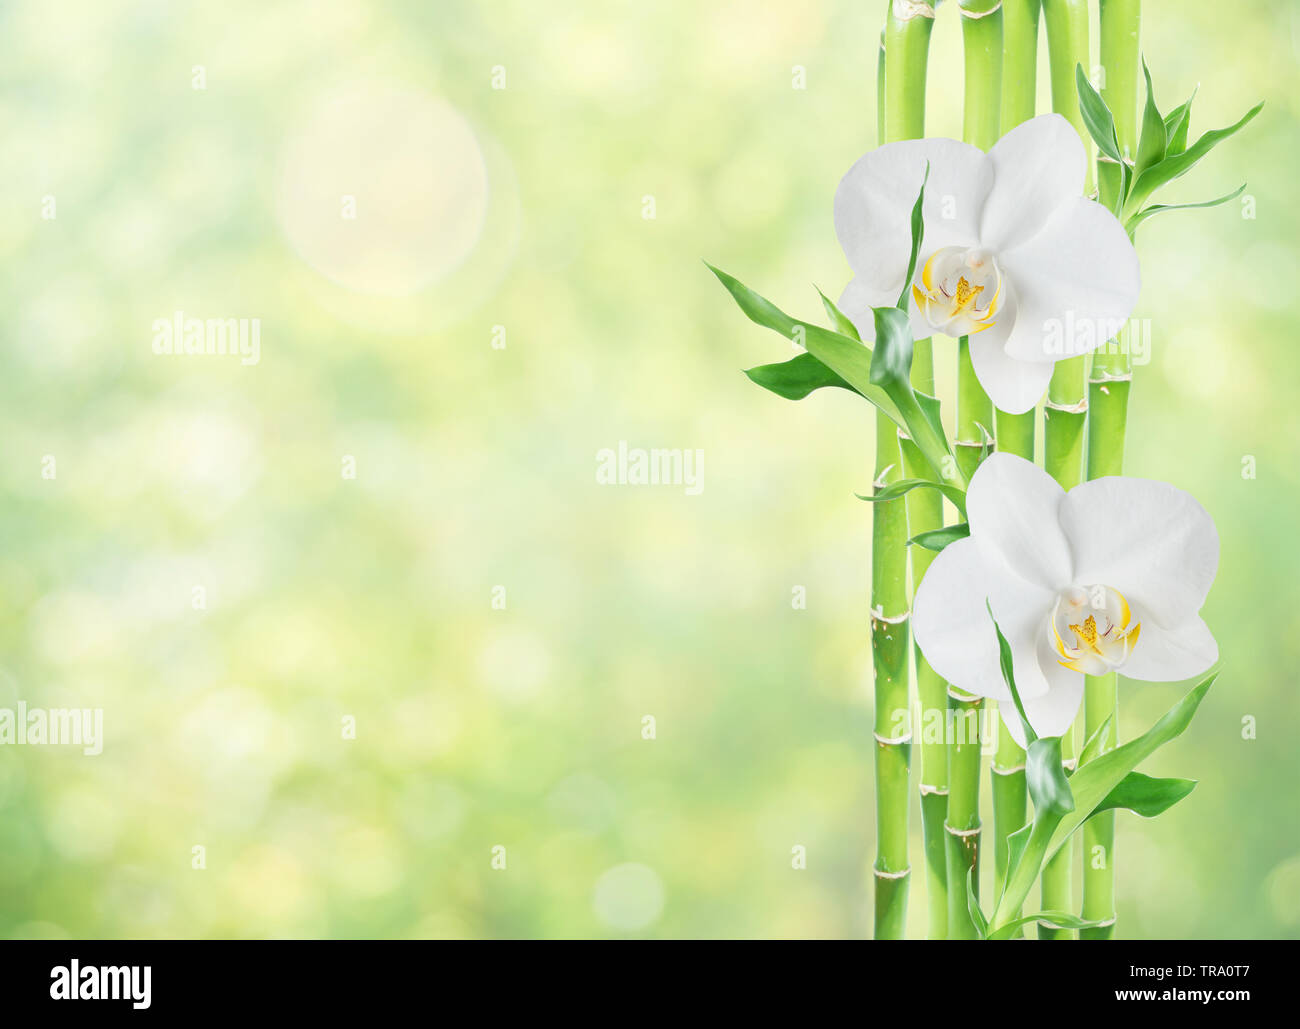 Several stems of Lucky Bamboo (Dracaena Sanderiana) with green leaves and two white orchid flowers, isolated on white background, with copy-space Stock Photo